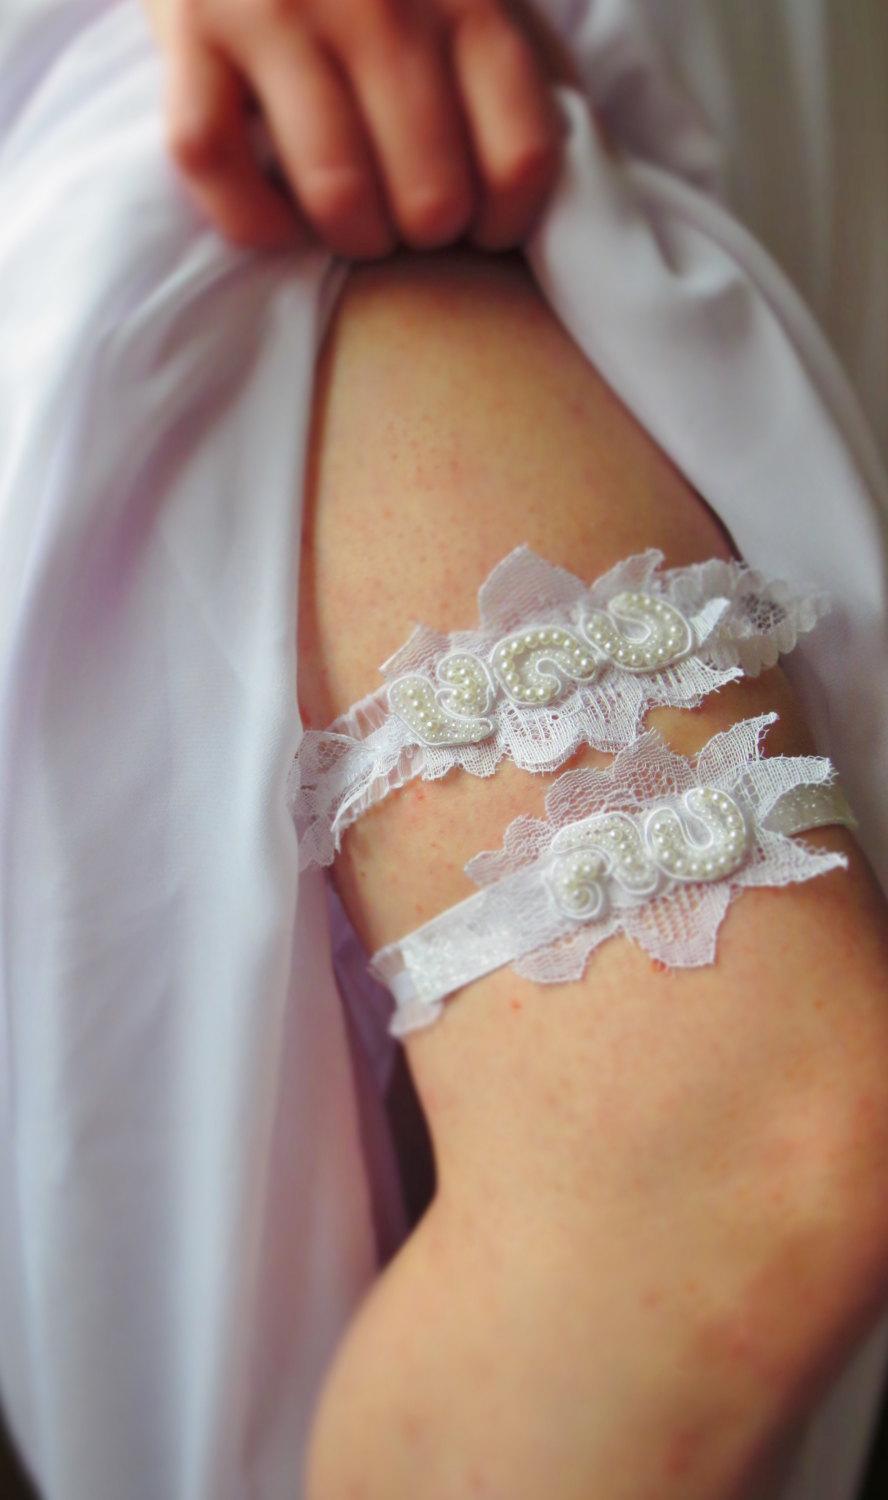 Hochzeit - Simple White Pearl, Lace and Ruffle Wedding Garter set- Keepsake and Toss away White ruffle garters w/ floral lace applique and pearl accent